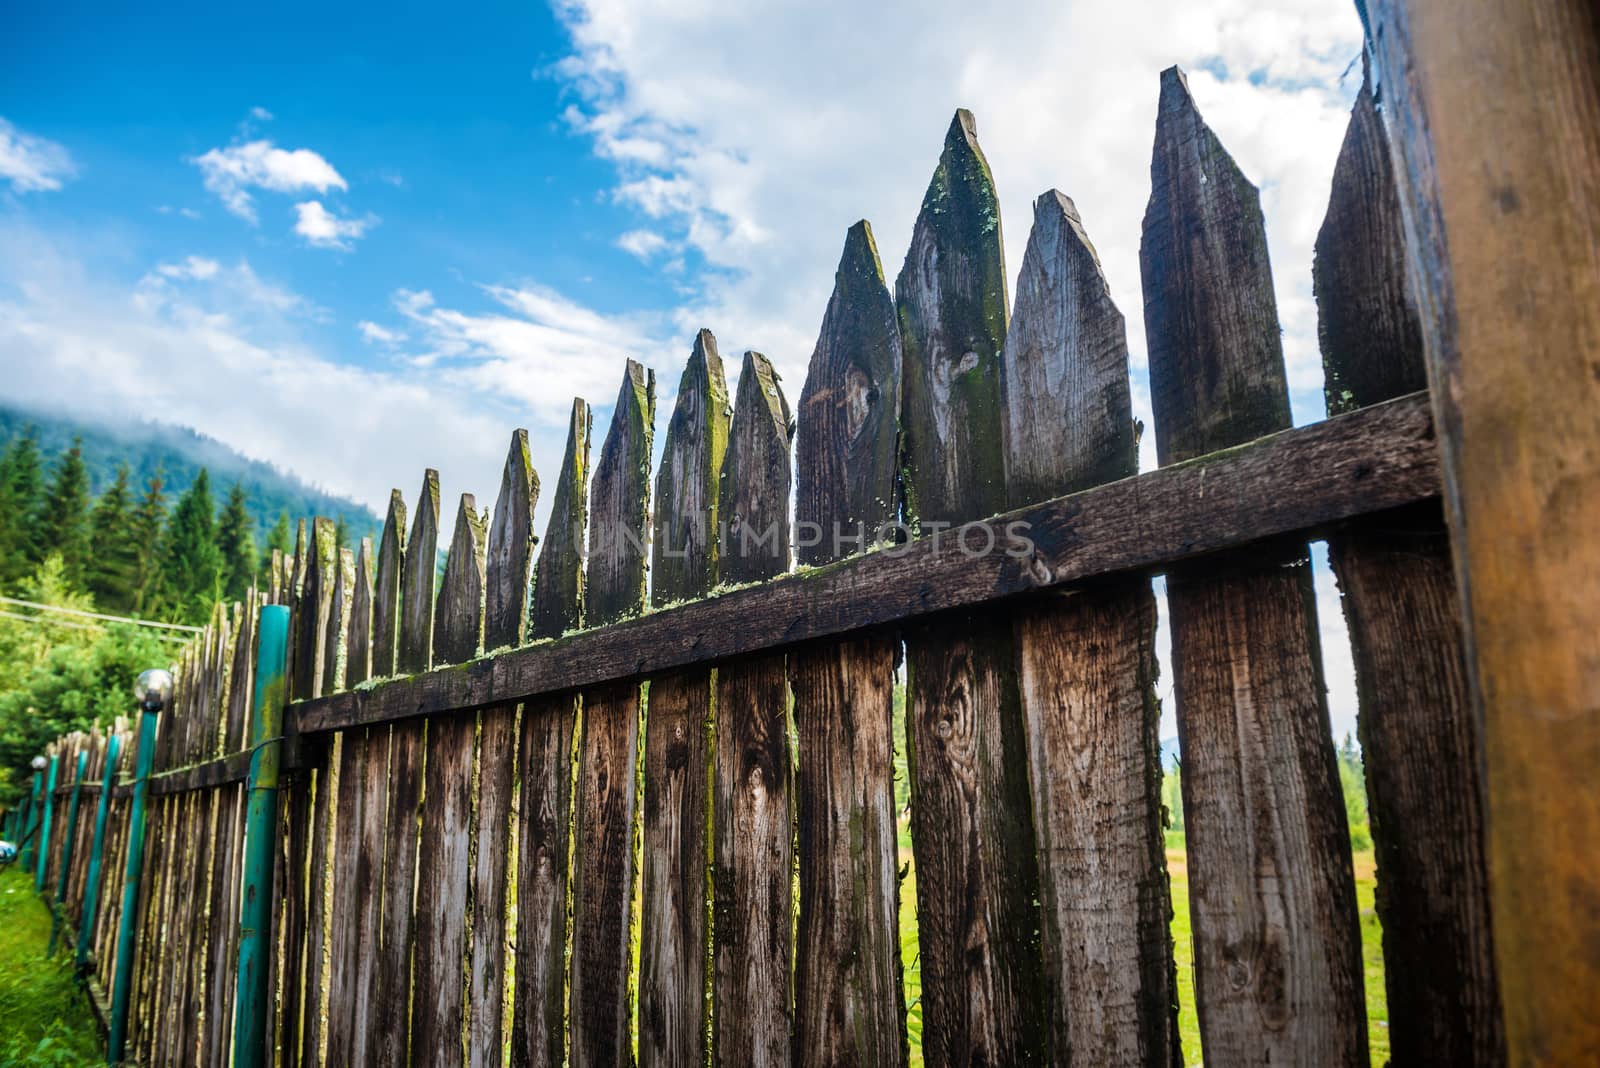 Old country fence with forest and blue sky on background